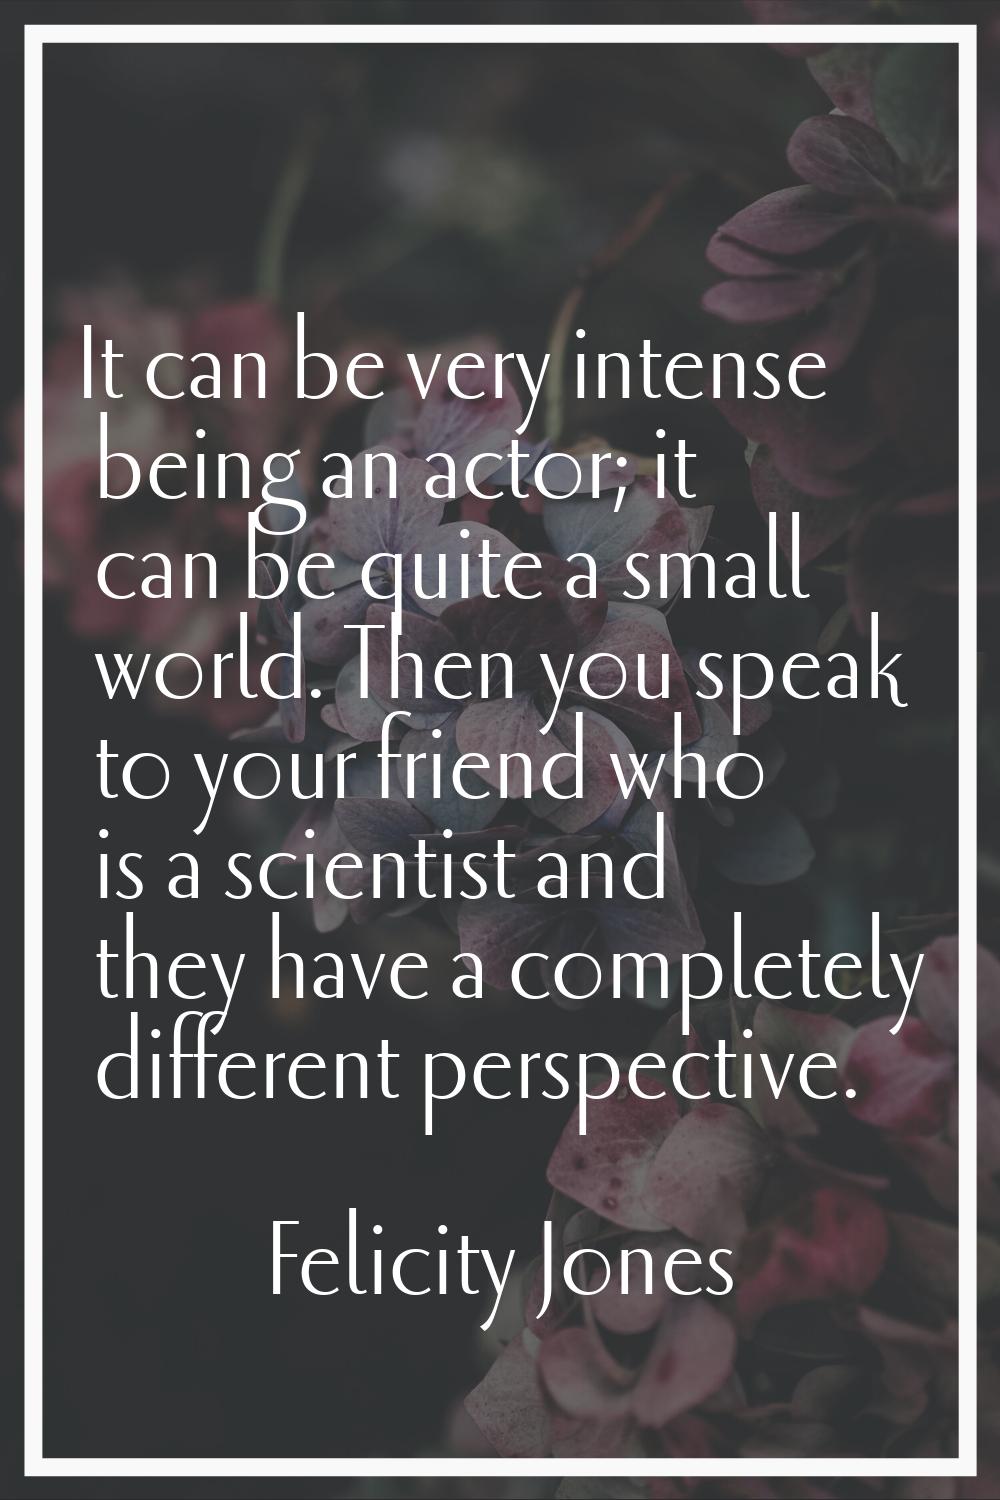 It can be very intense being an actor; it can be quite a small world. Then you speak to your friend